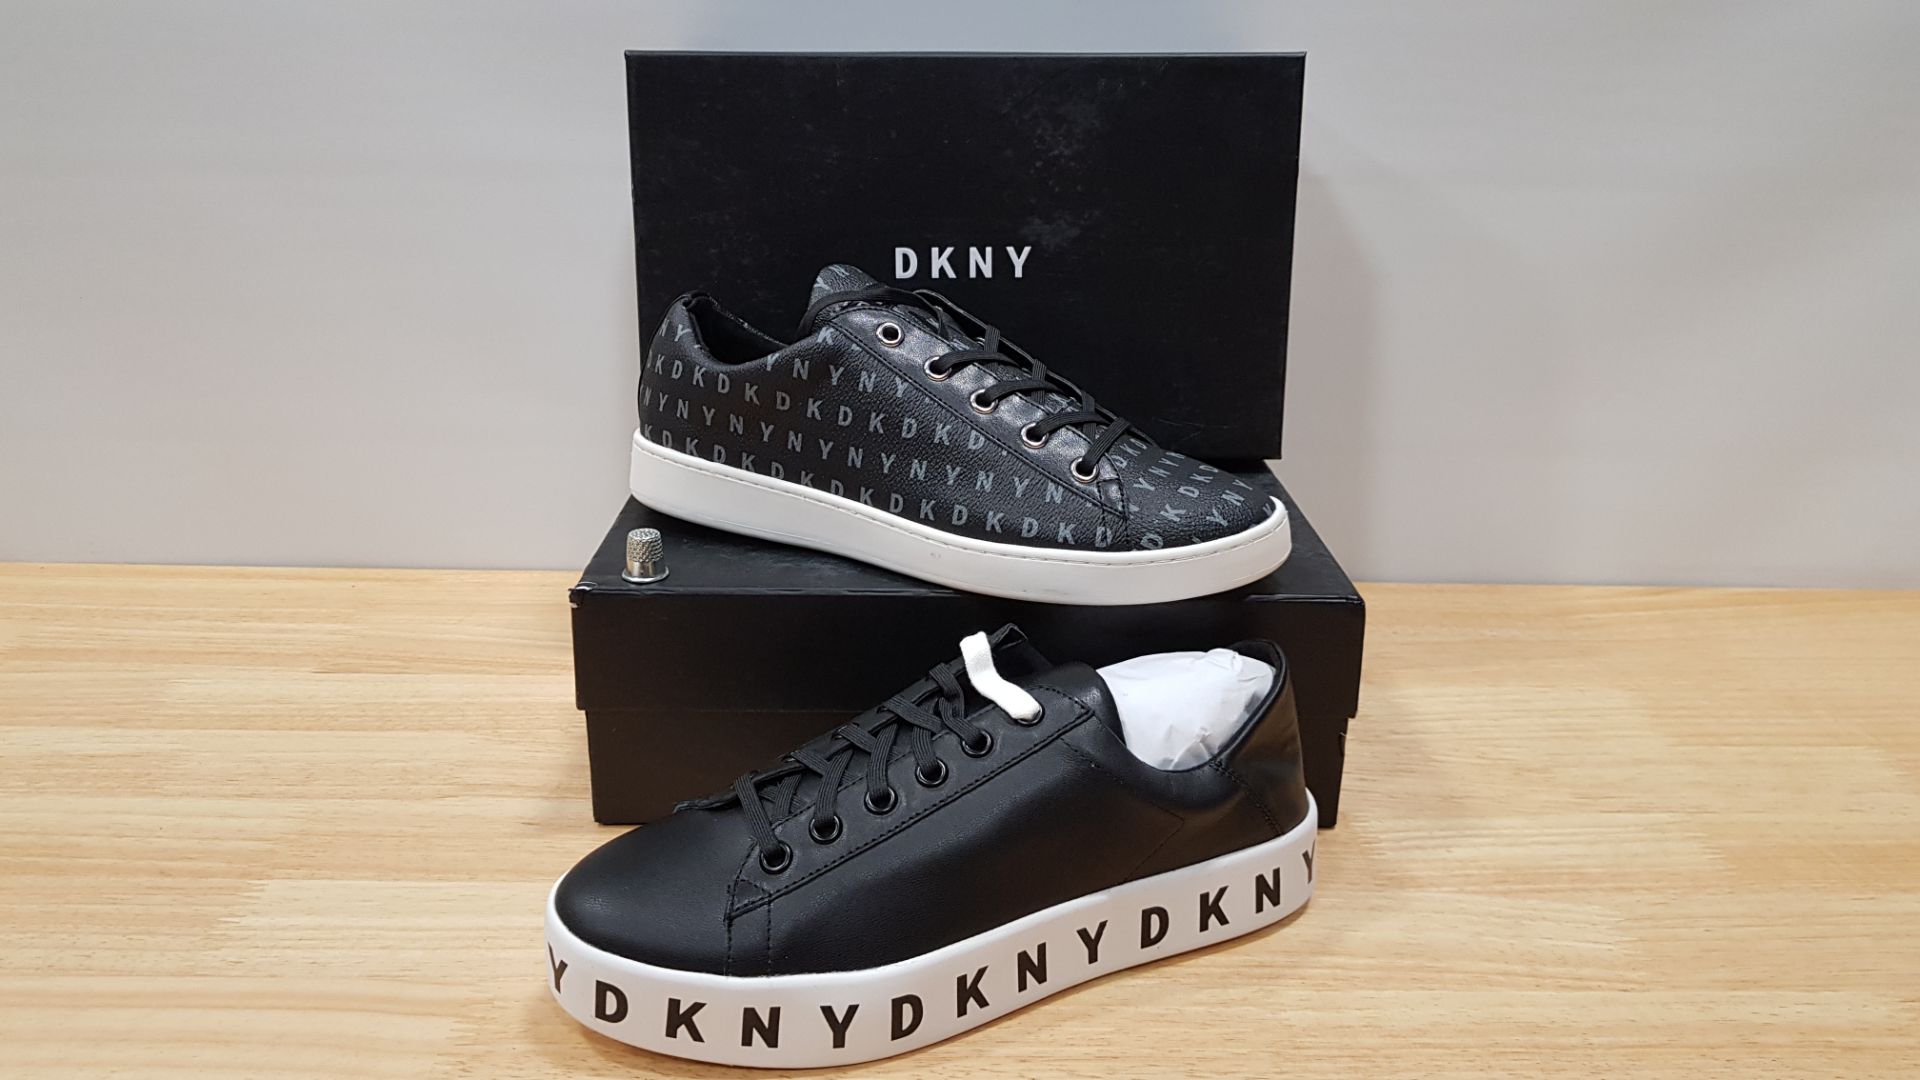 4 PIECE MIXED DKNY TRAINER LOT CONTAINING 2 X BINNA LACE UP SNAEAKERS AND 2 X BANCON LACE UP